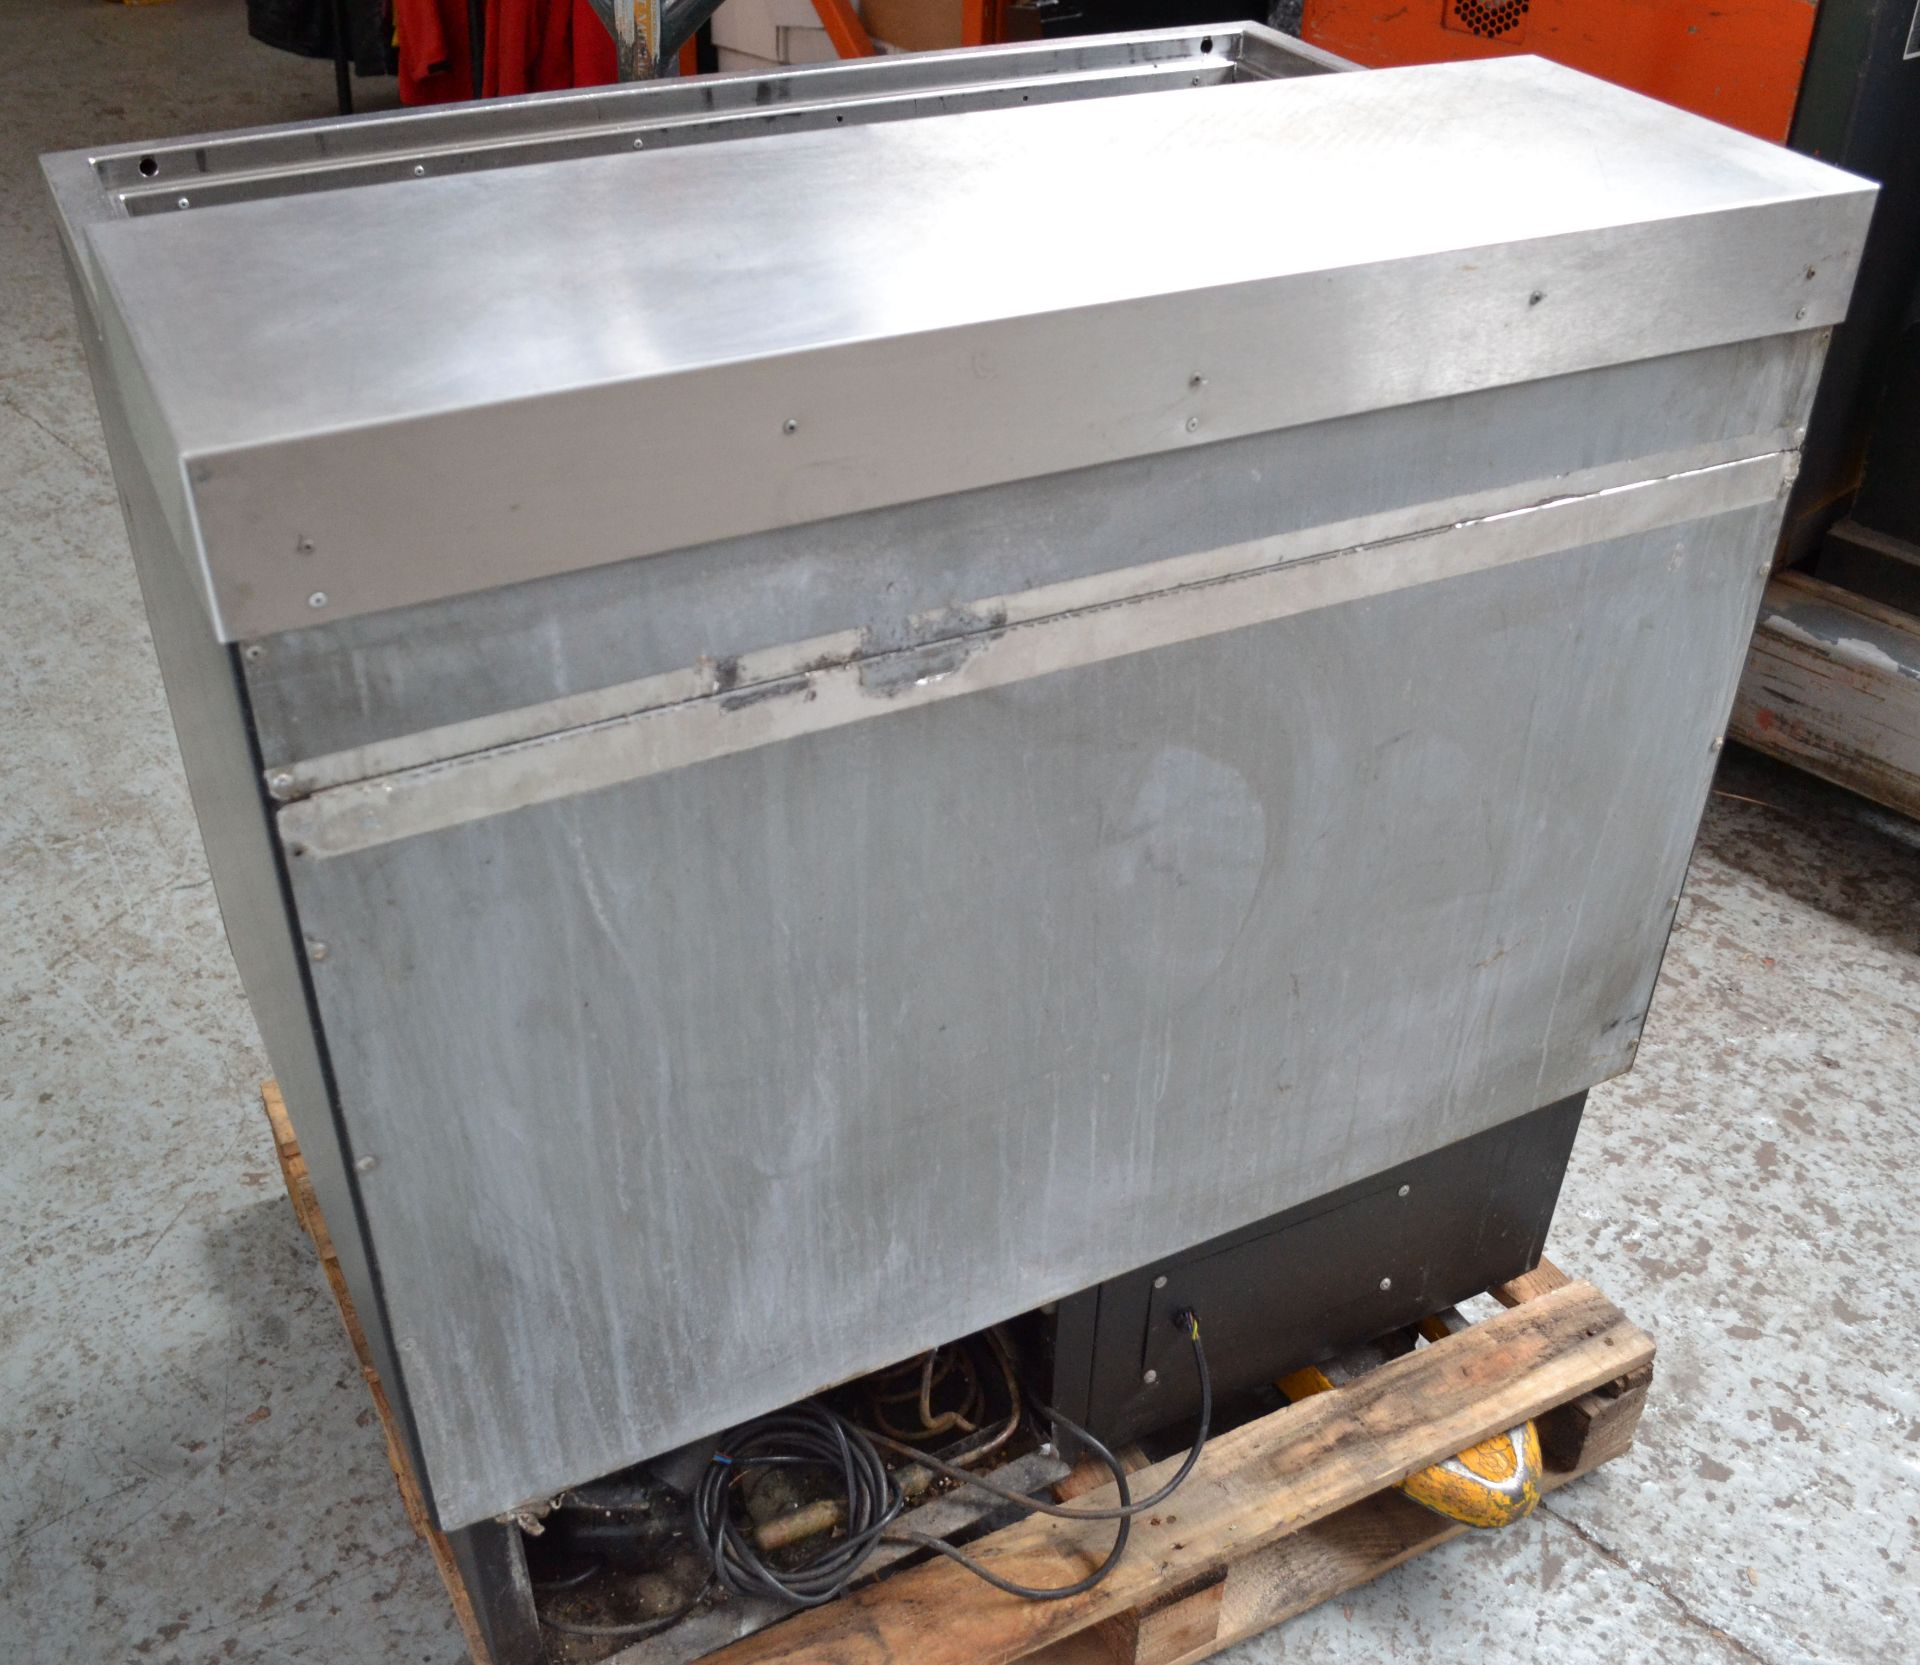 1 x IMC BK90 Series 2 Top Loading Bottle Cooler - Ref :NCE003 - CL007 - Location: Altrincham - Image 14 of 17